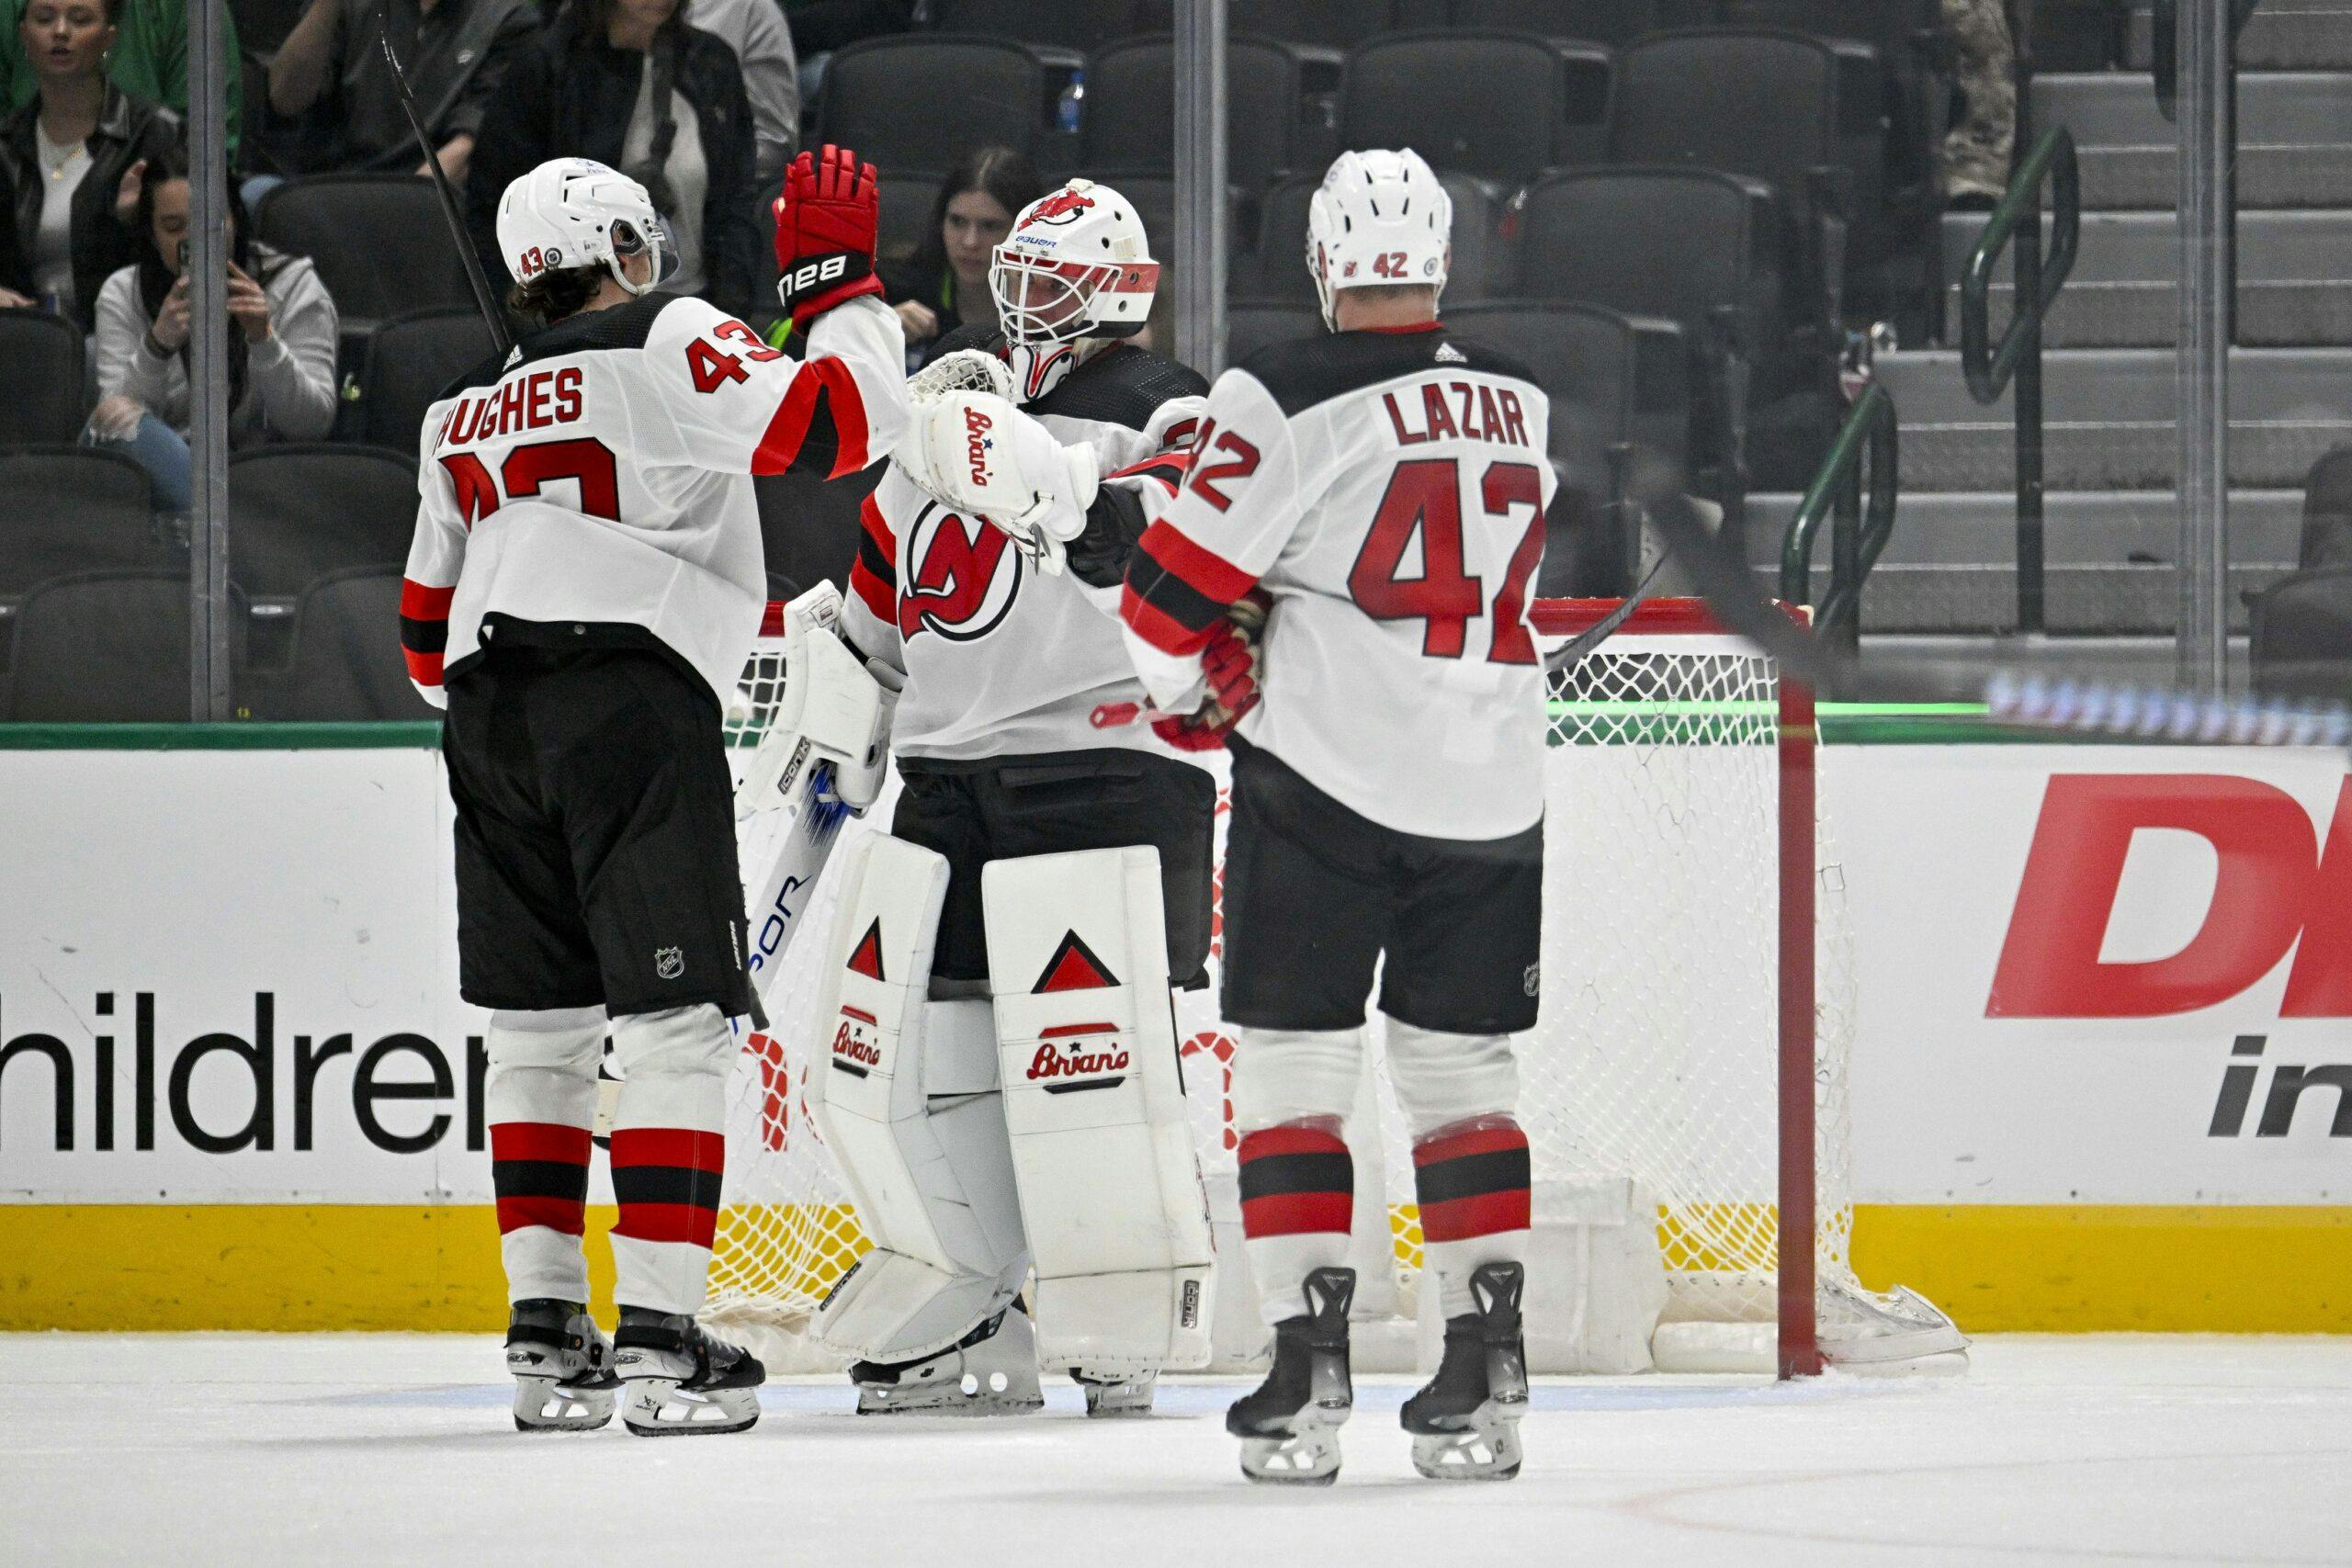 The New Jersey Devils have little room for error as team chases playoff spot